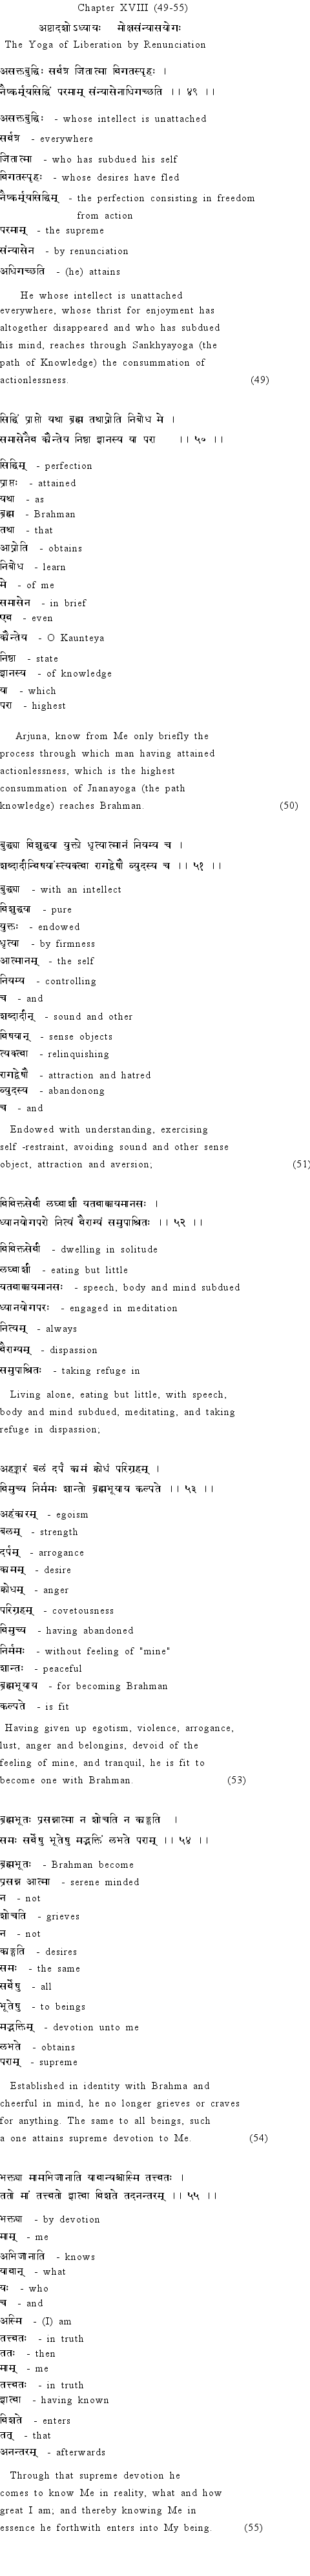 Text of Ch.18_5